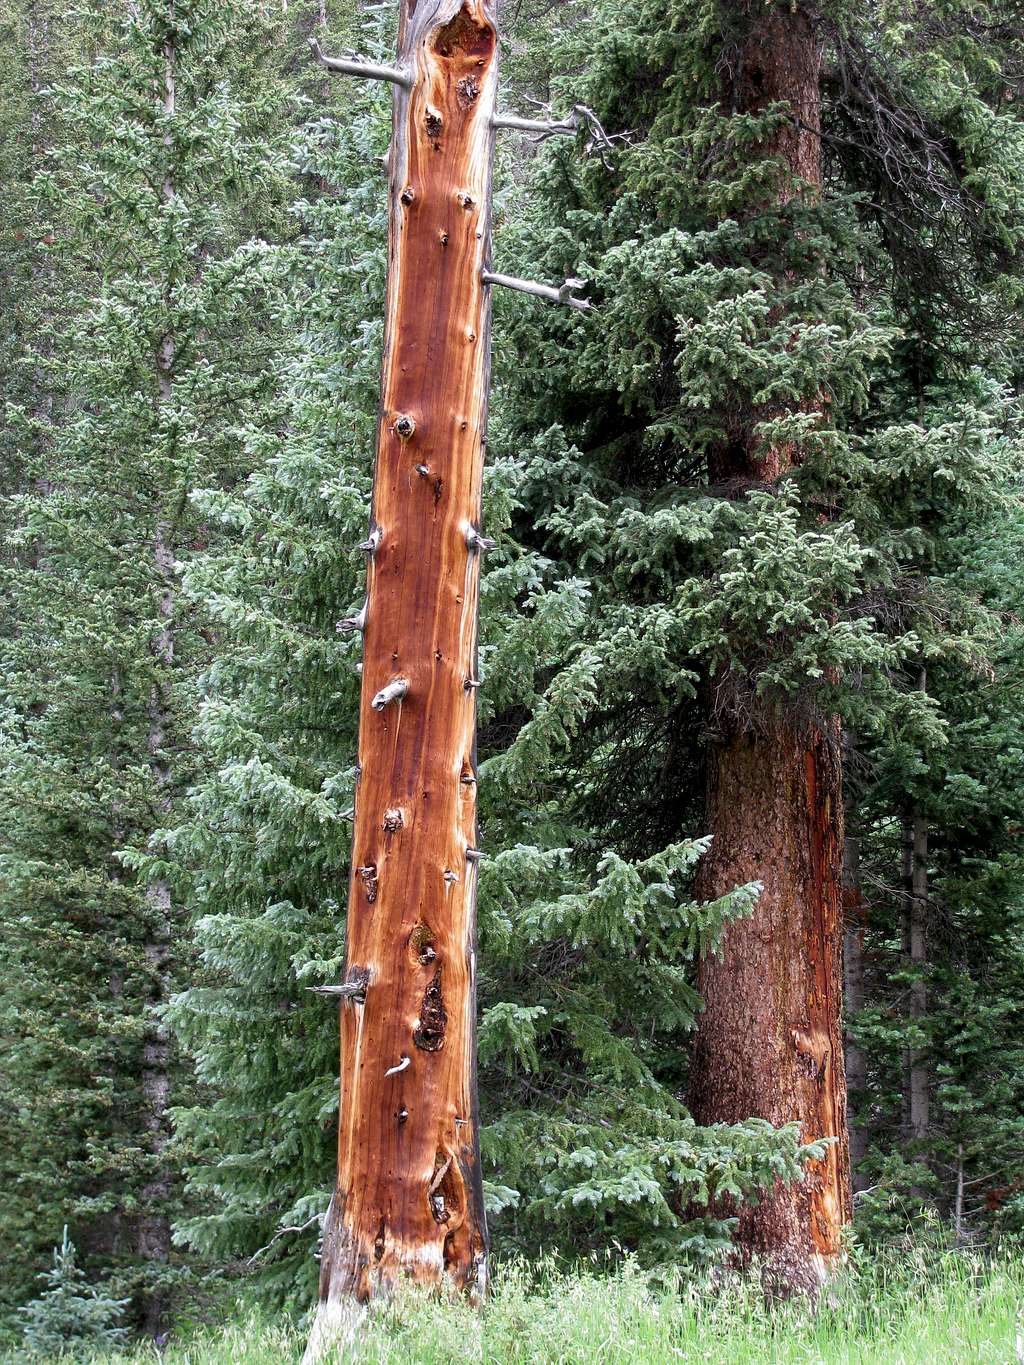 Anything is red in Colorado - even the tree trunks